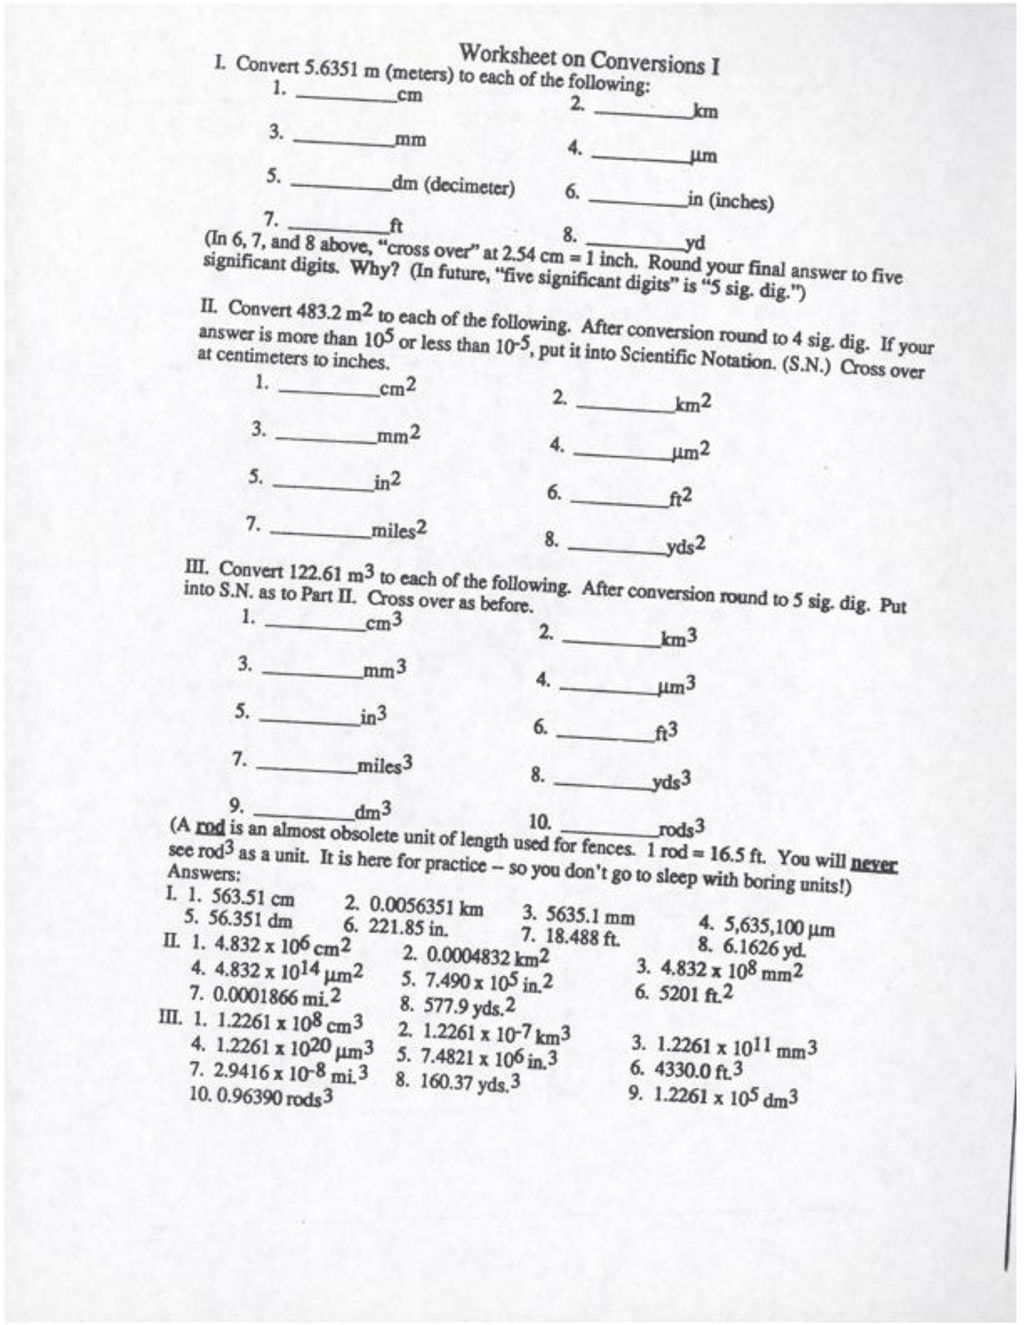 Miniature of Worksheet on Conversions I